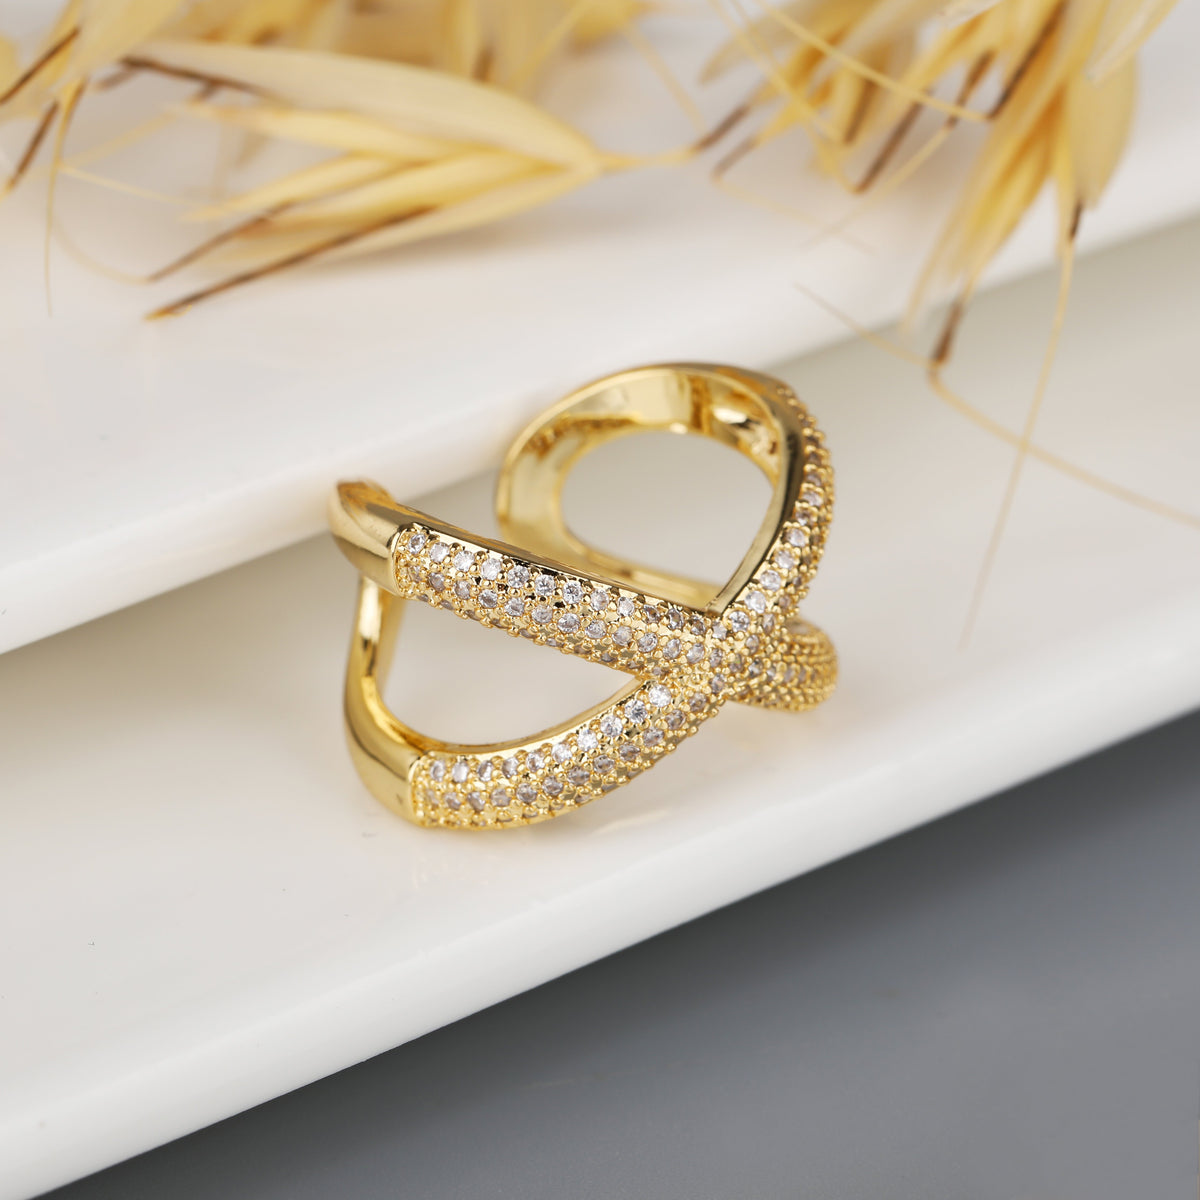 Gold Plated Micro Pave Trendy Criss-Cross, X Adjustable Ring